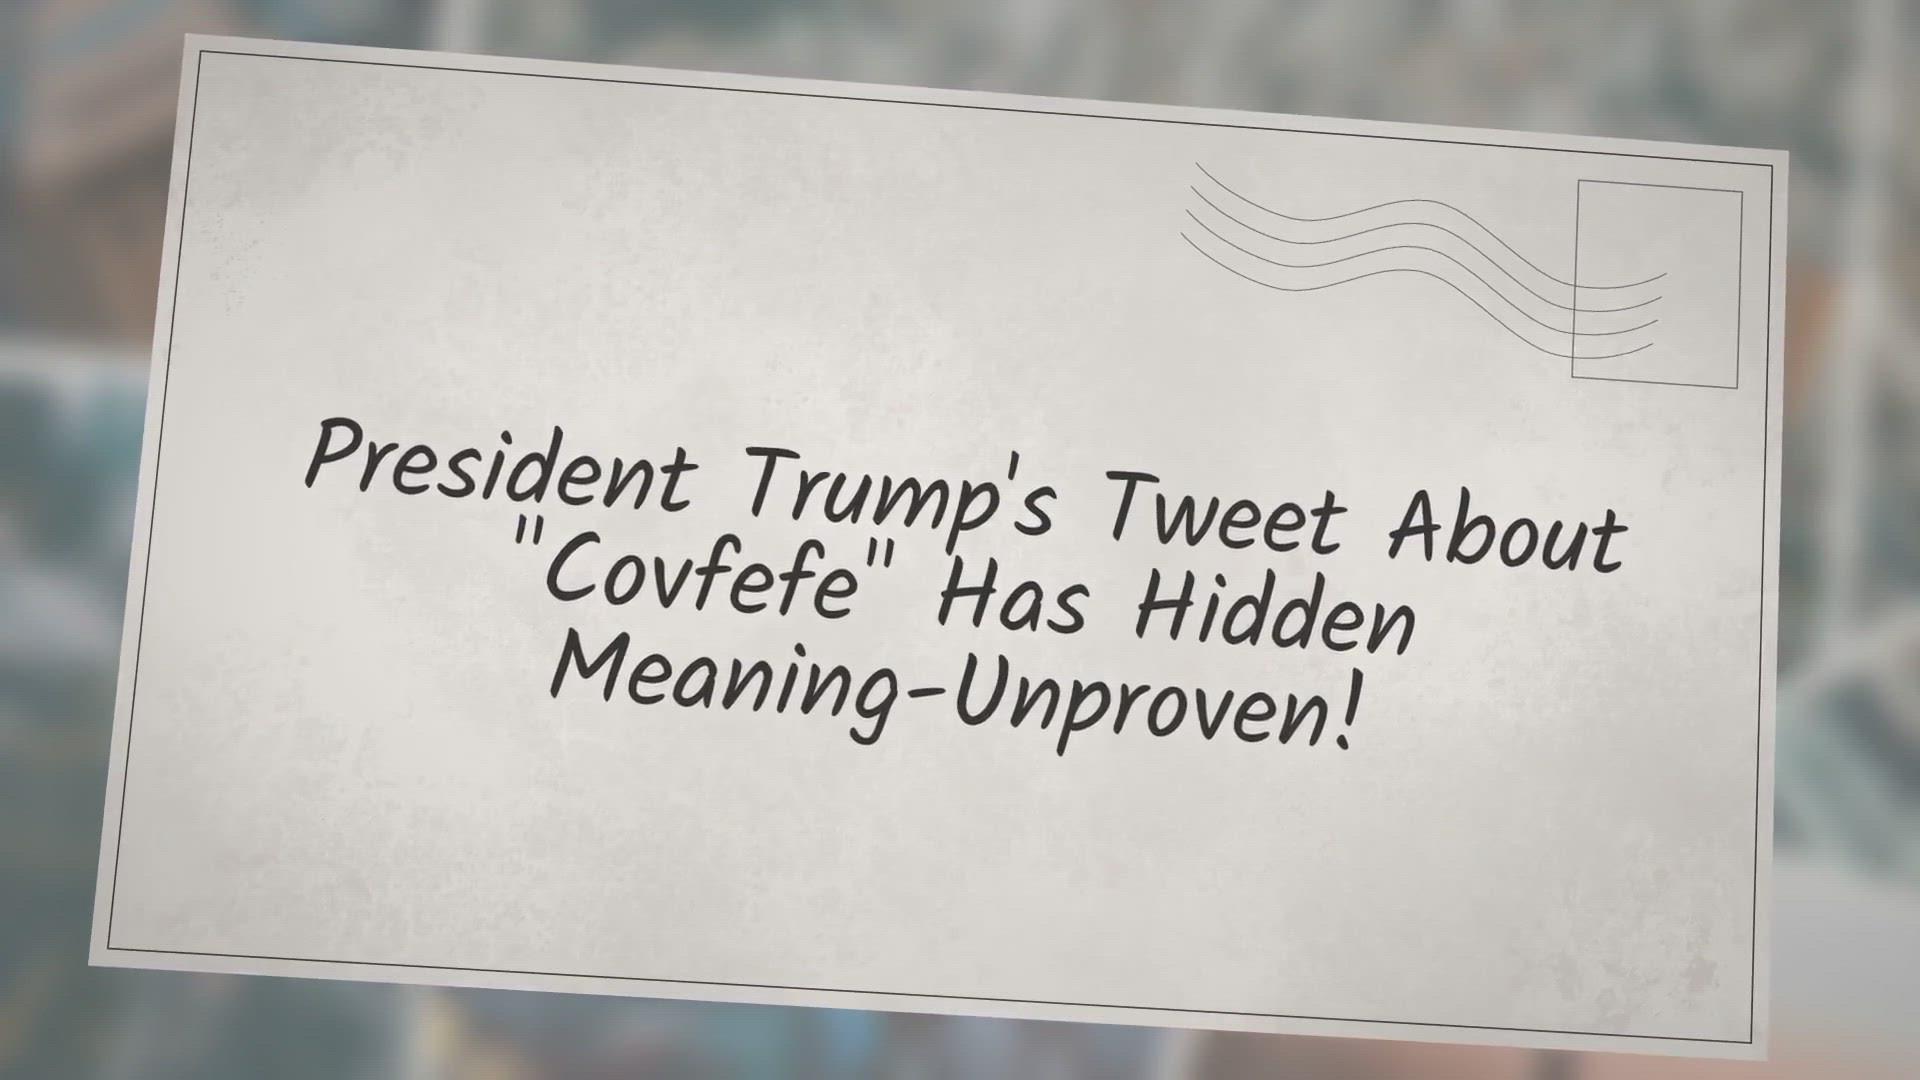 'Video thumbnail for President Trump's Tweet About "Covfefe" Has Hidden Meaning-Unproven!'